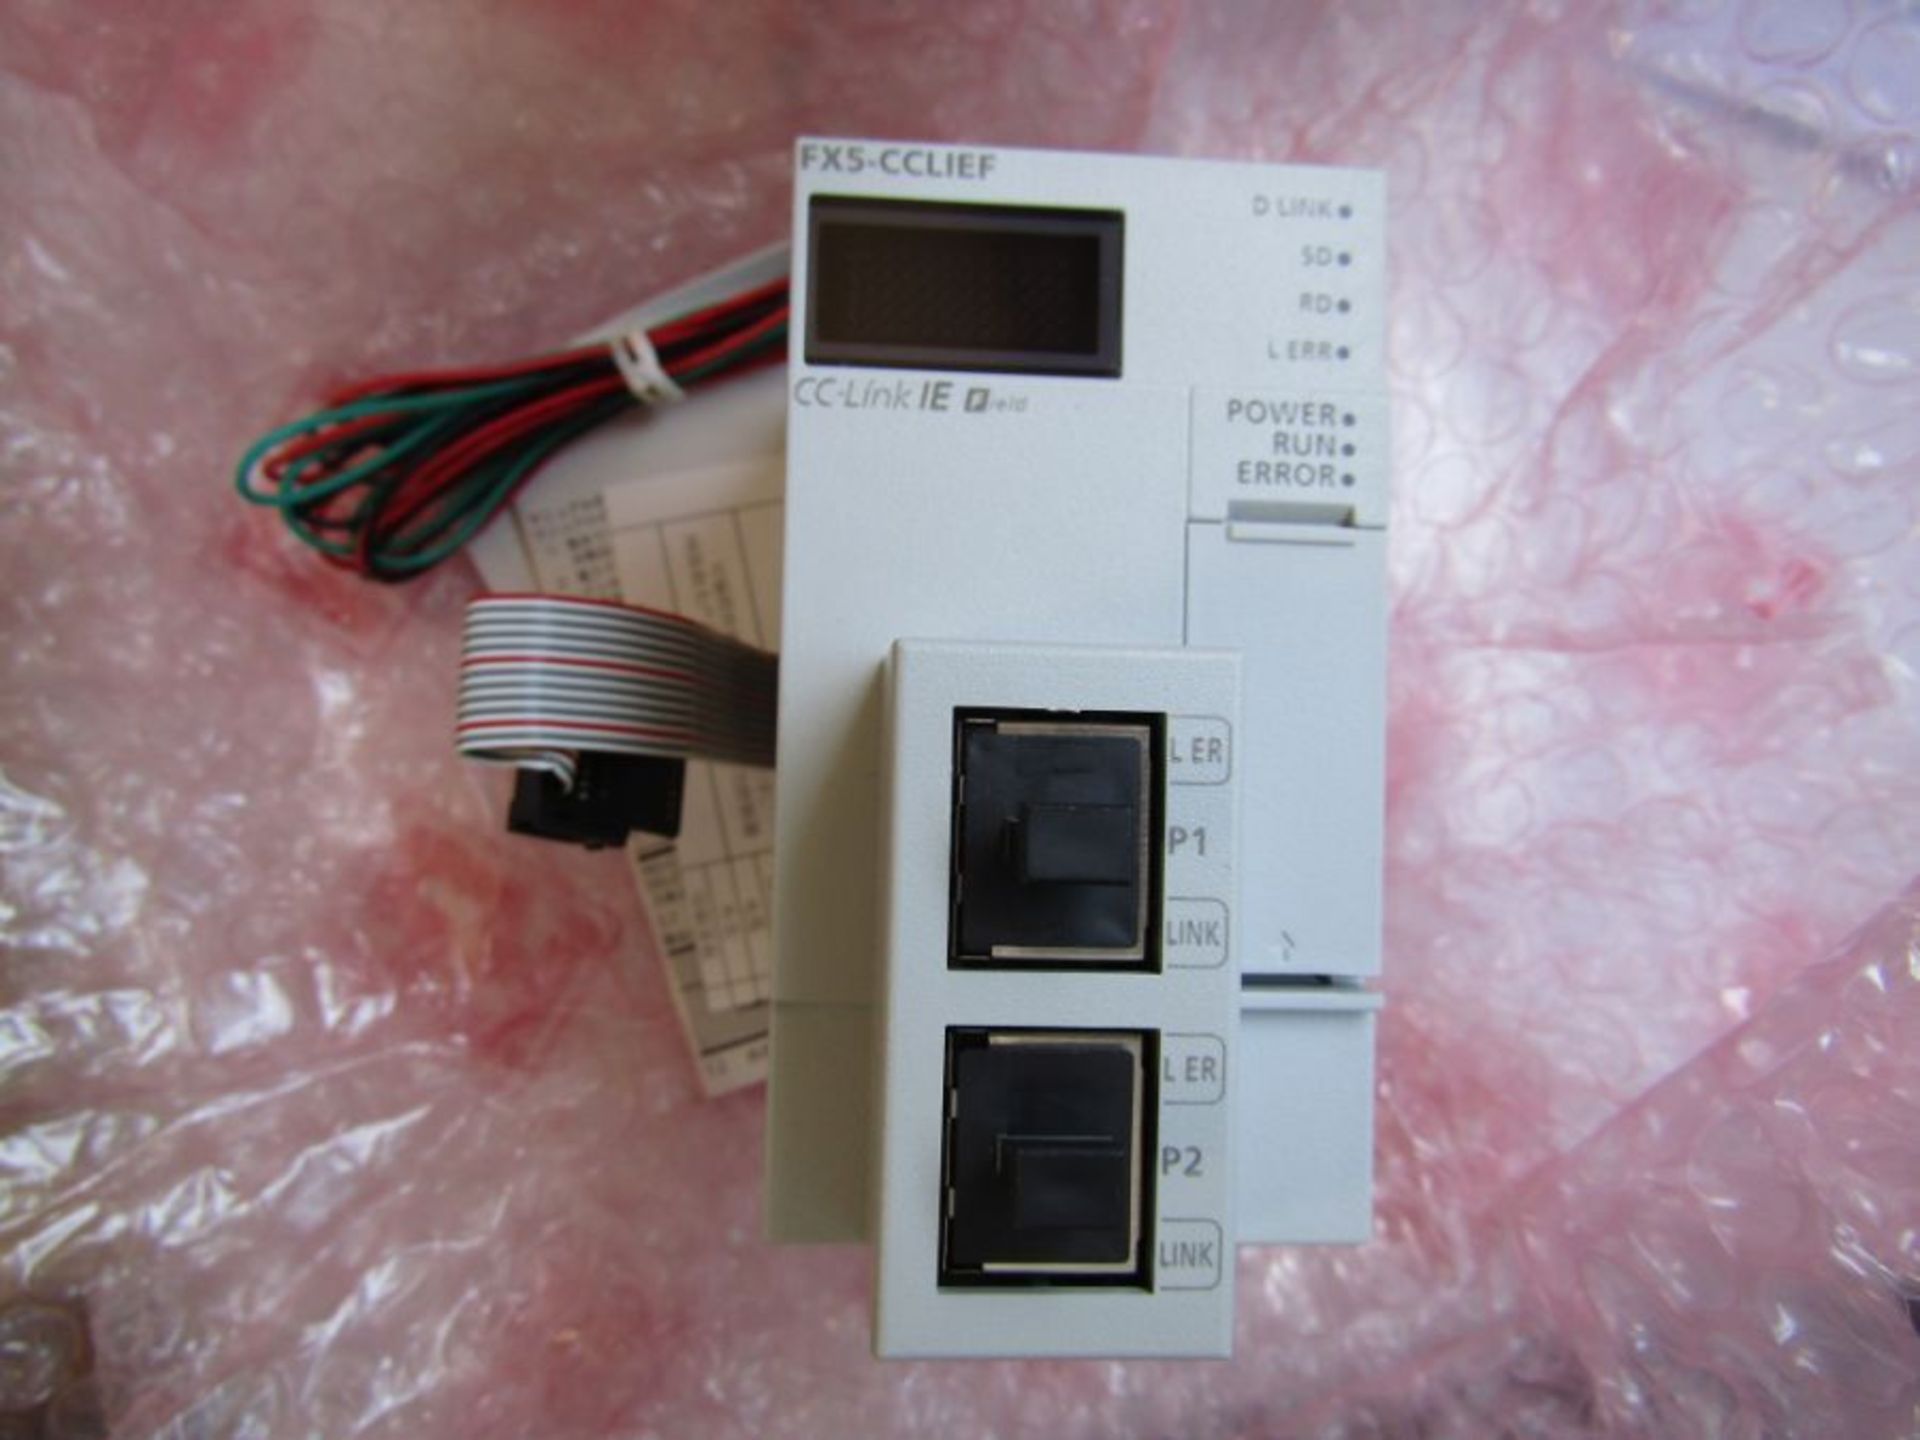 Mitsubishi - Expansion Module for MELSEC iQ-F PLC FX5-CCLIEF A3 1359294 - Image 4 of 6